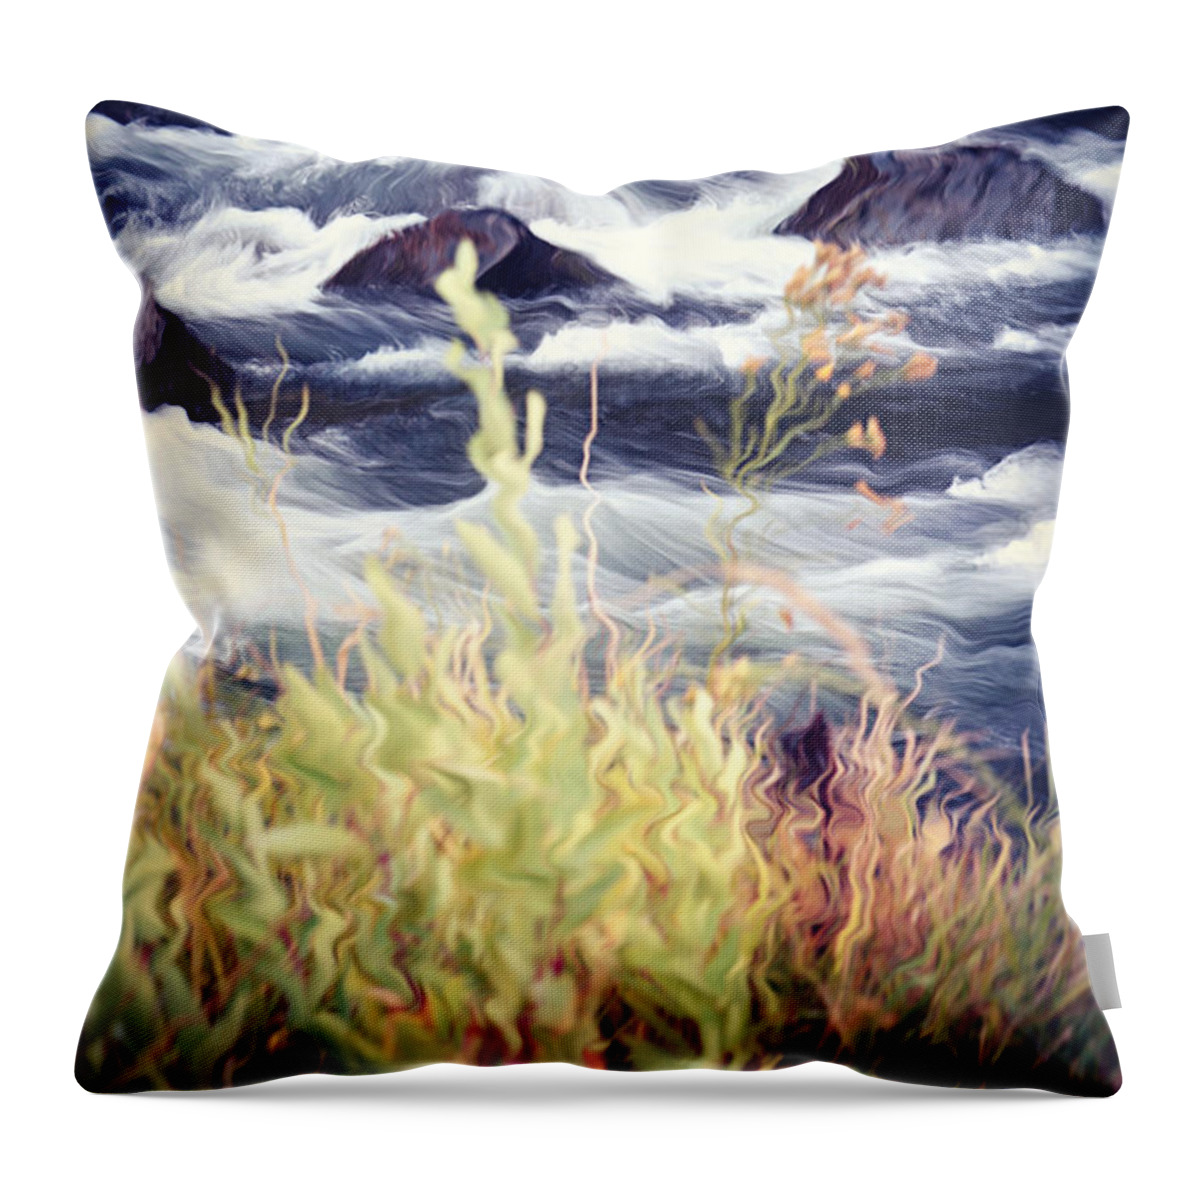 Applegate River Throw Pillow featuring the photograph Applegate River by Melanie Lankford Photography